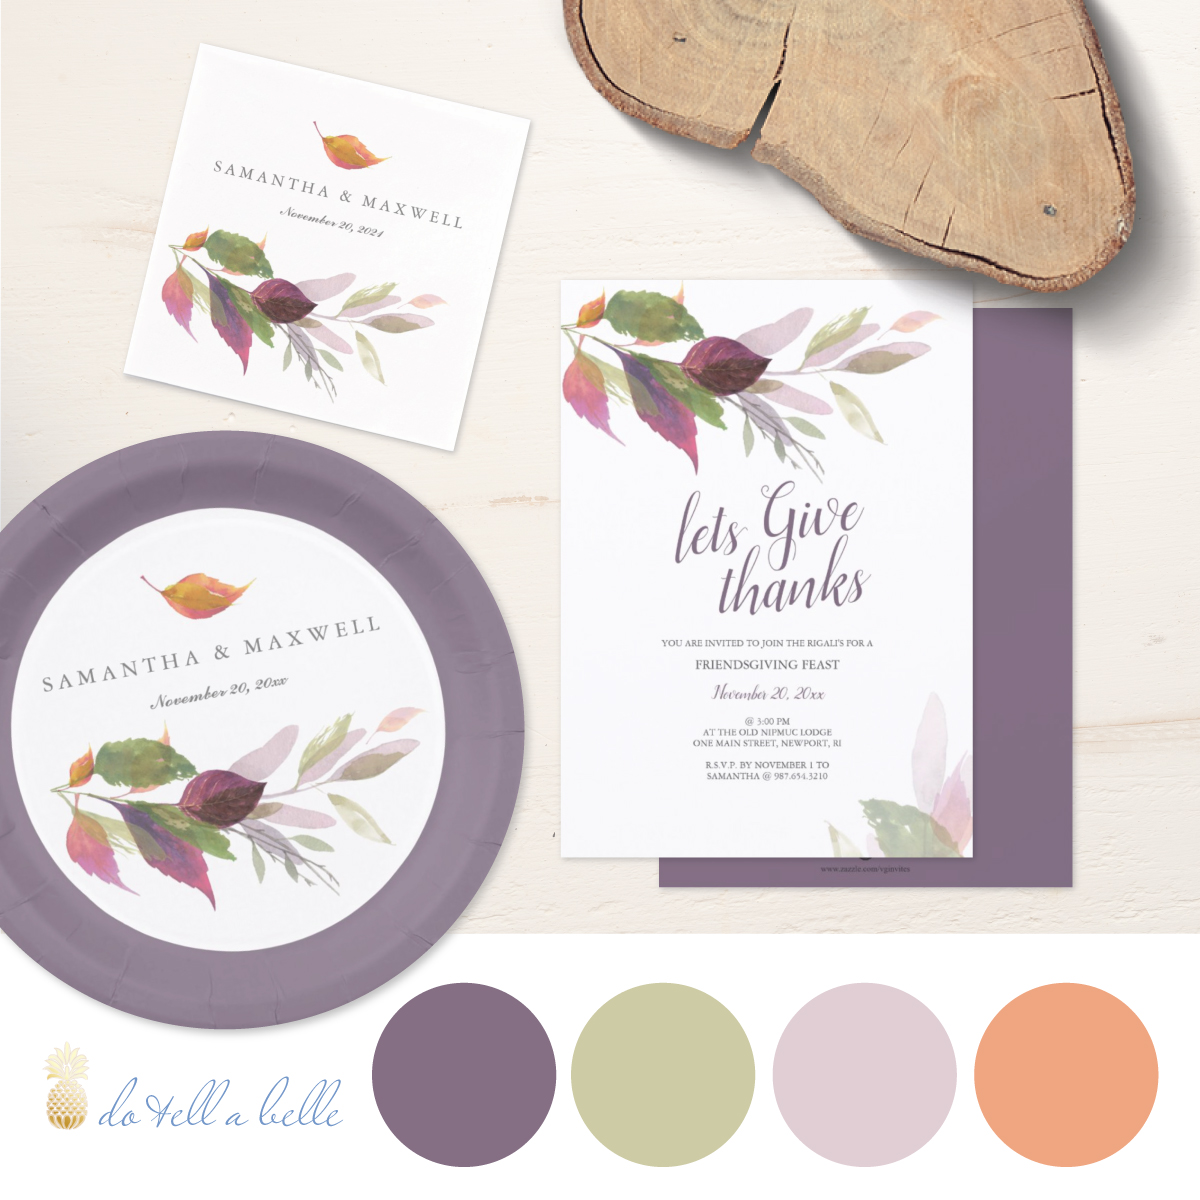 Fall Foliage Gardens Line by Victoria Grigaliunas of Do Tell a Belle